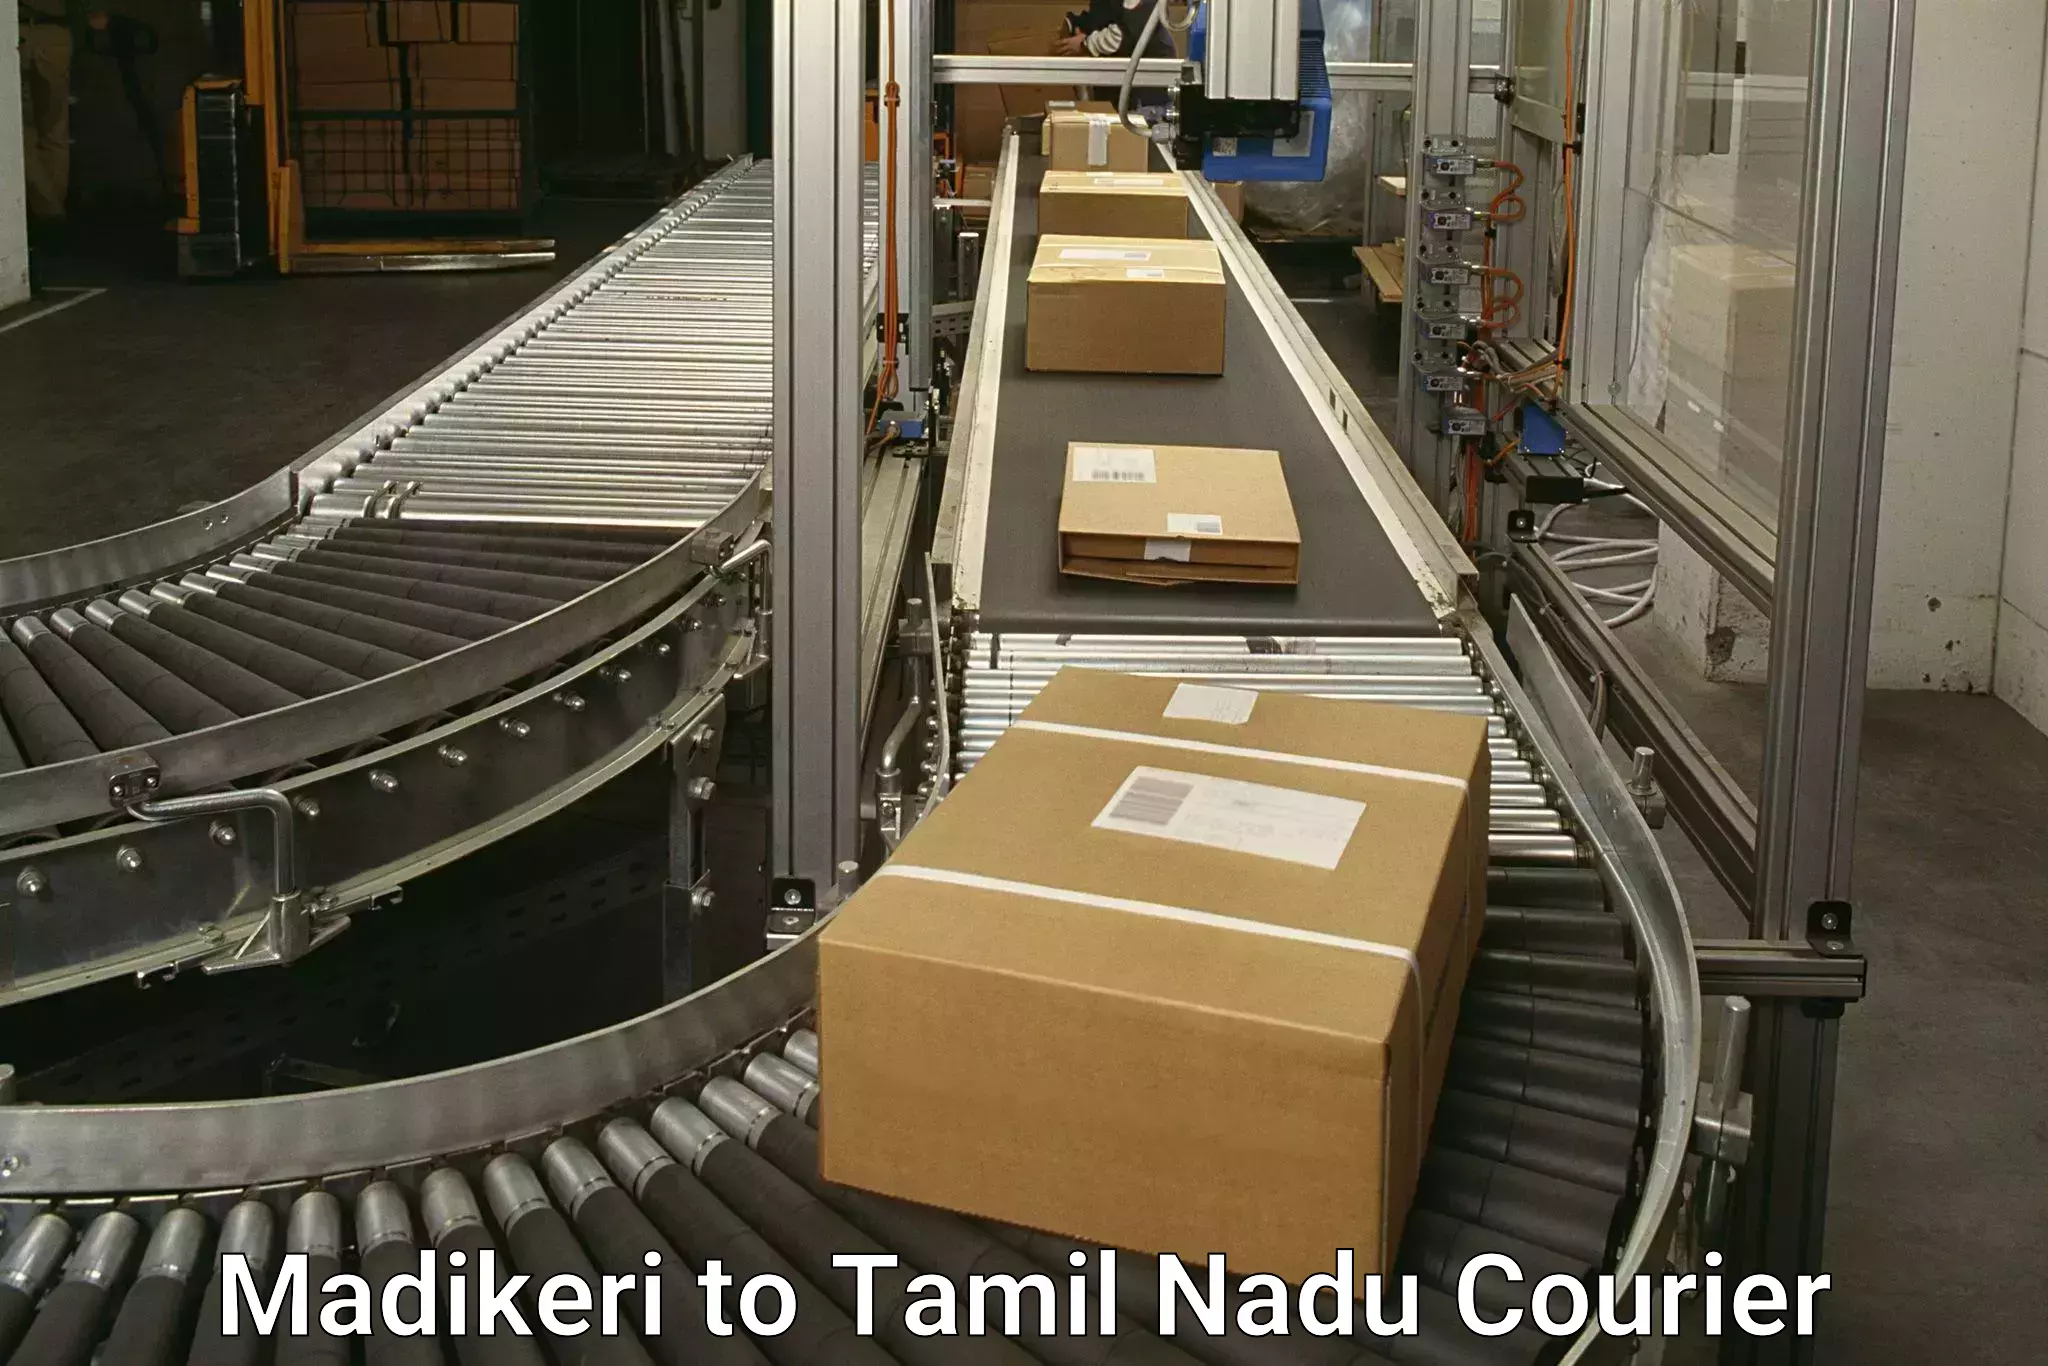 State-of-the-art courier technology Madikeri to Chennai Port